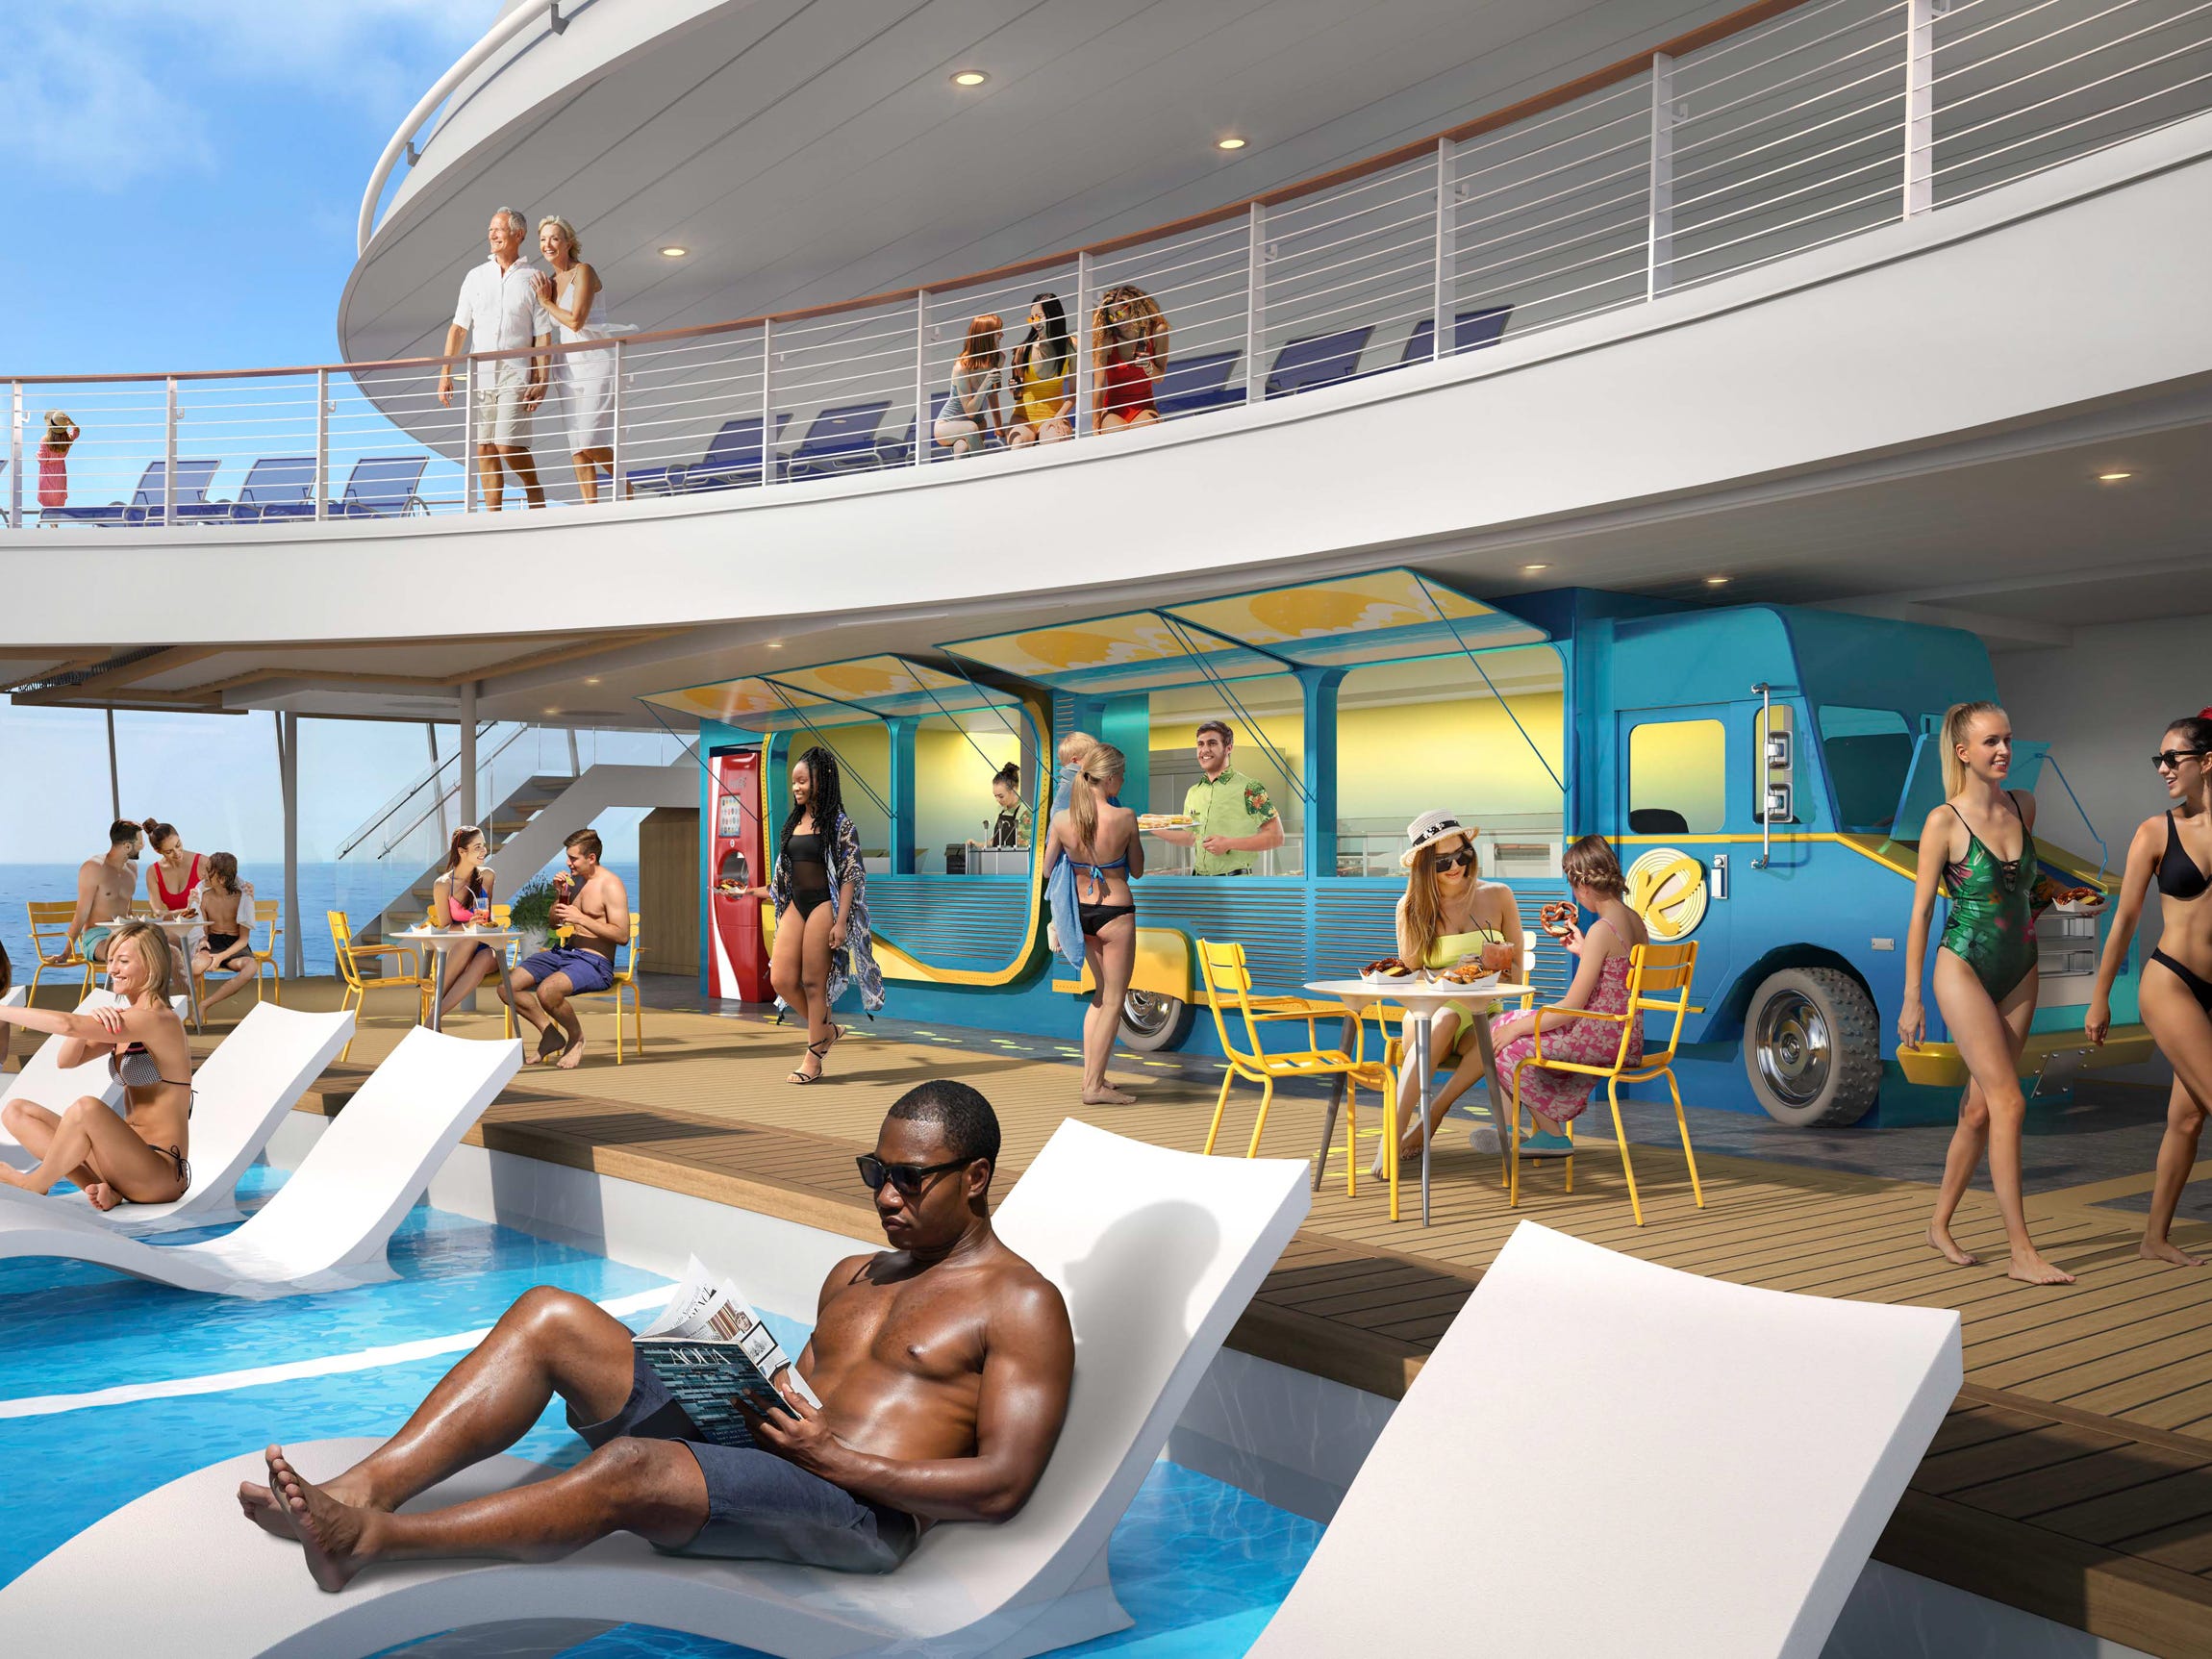 <p>Meanwhile, their parents could grab a bite at what Royal Caribbean is calling a “poolside food truck.”</p><p>We doubt it’ll drive too far.</p><p>Like most cruise ships, the <a href="https://www.businessinsider.com/photos-my-first-cruise-10-years-celebrity-cruises-new-ship-2021-11#i-didnt-have-time-to-go-for-a-swim-but-i-could-definitely-picture-myself-lounging-around-the-multiple-pools-especially-the-adults-only-solarium-for-a-couple-of-hours-20">Solarium</a> will serve as these parents’ adult-only haven when they need some time by a pool and away from their nagging children.</p>